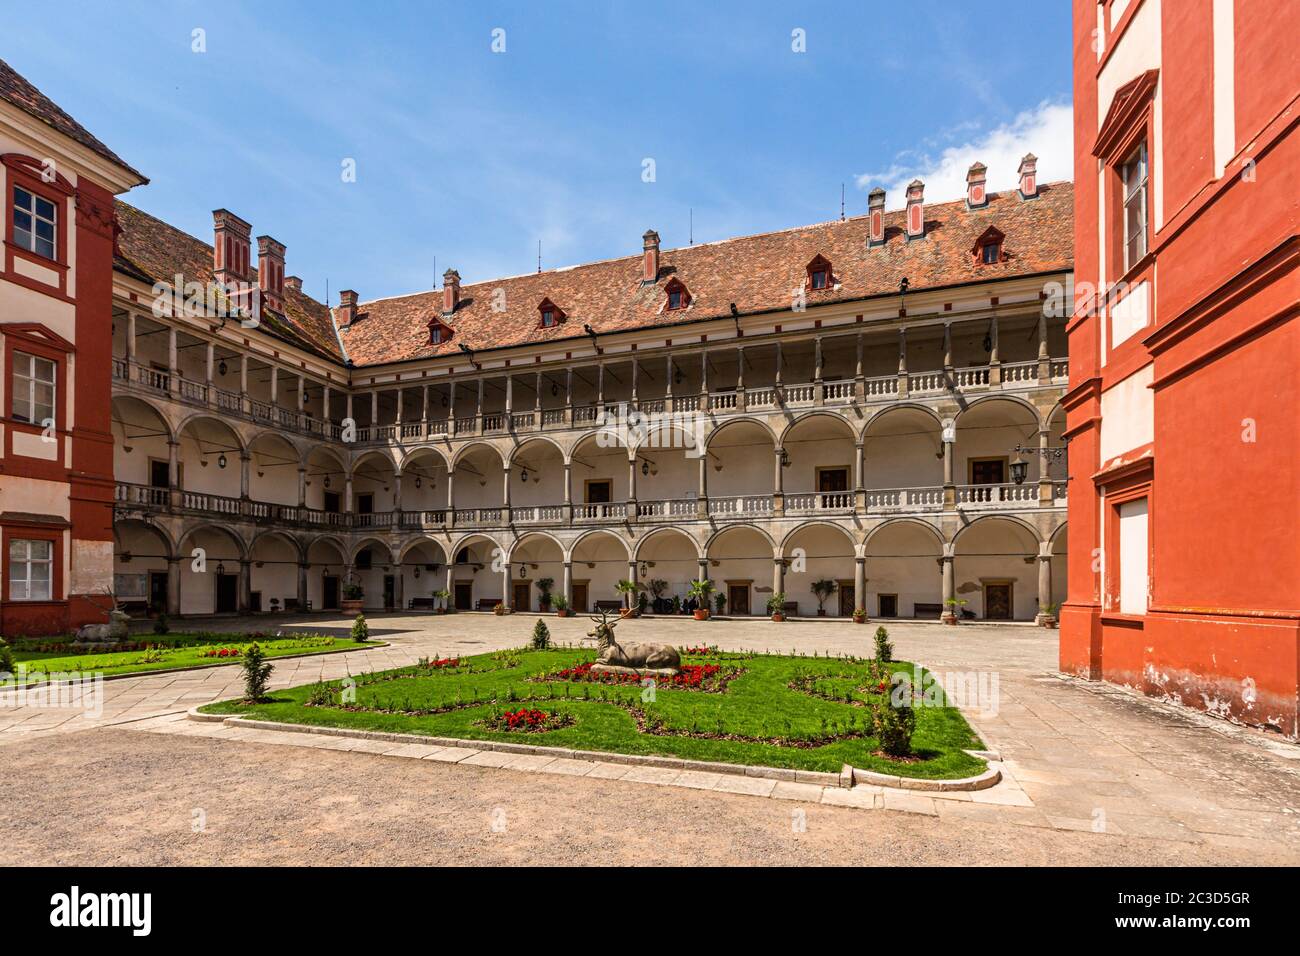 Opocno / Czech Republic - June 16 2020: View of the castle courtyard with arcades and red facade. Green lawn with statue and flowers in foreground. Stock Photo